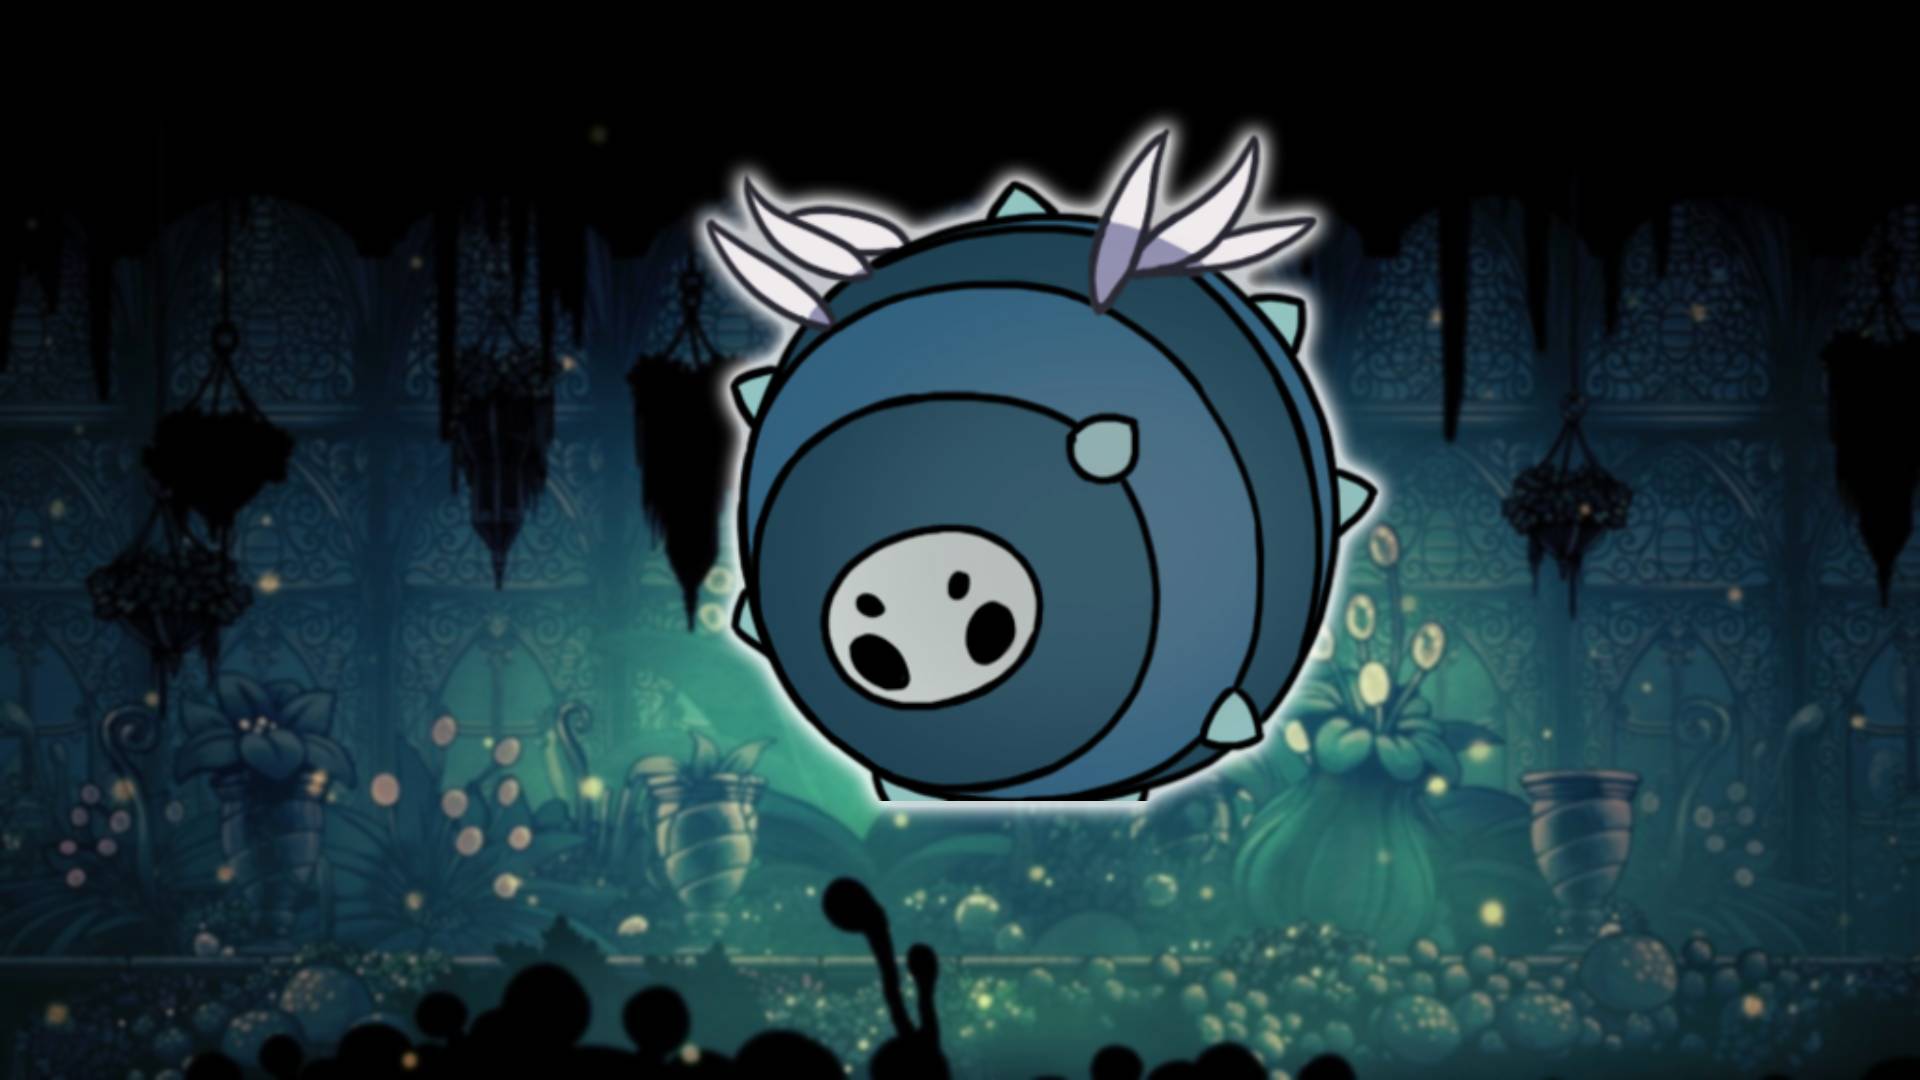 Oblobbles - the Hollow Knight boss, is visible against a mossy green background area from Hollow Knight 